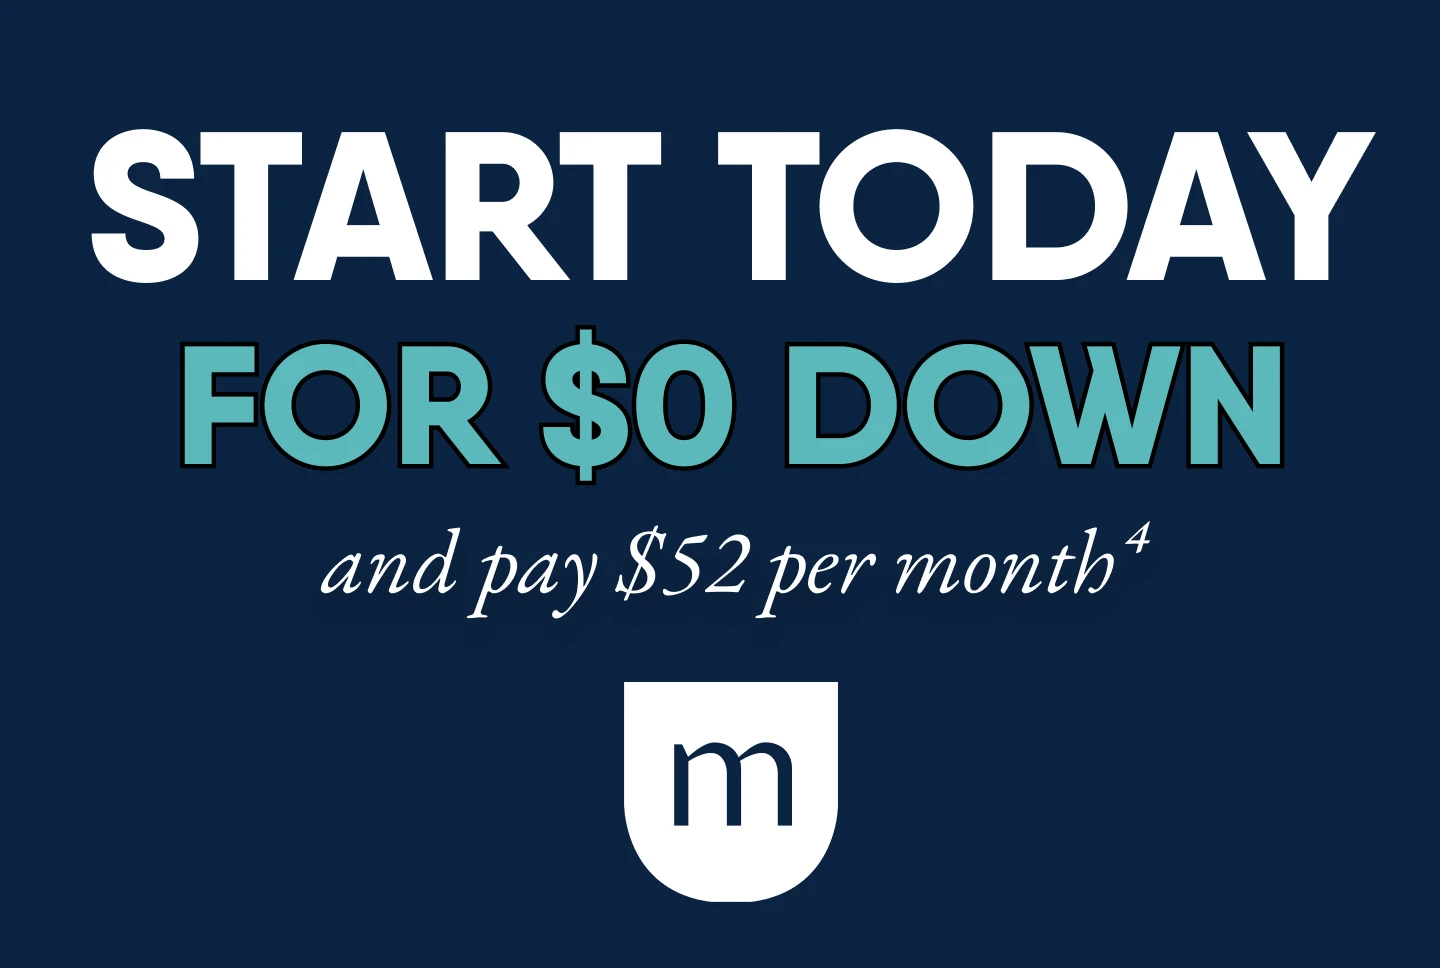 Start today for $0 down and pay $52 per month with 60 month promotional financing.